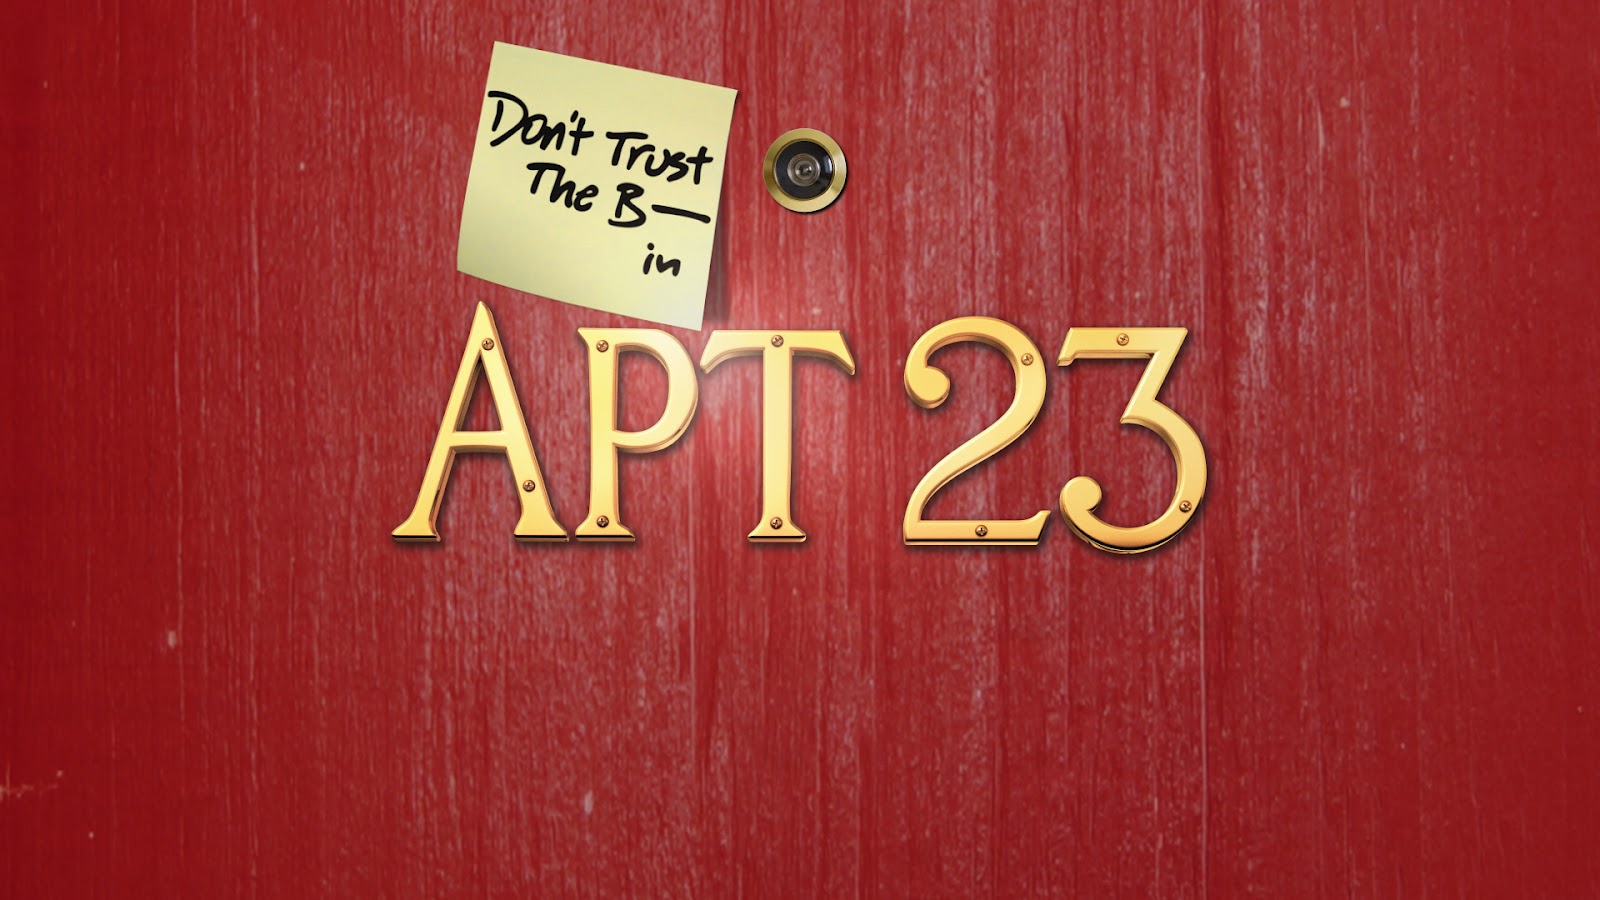 "Don't Trust the b in Apt 23". Dont only